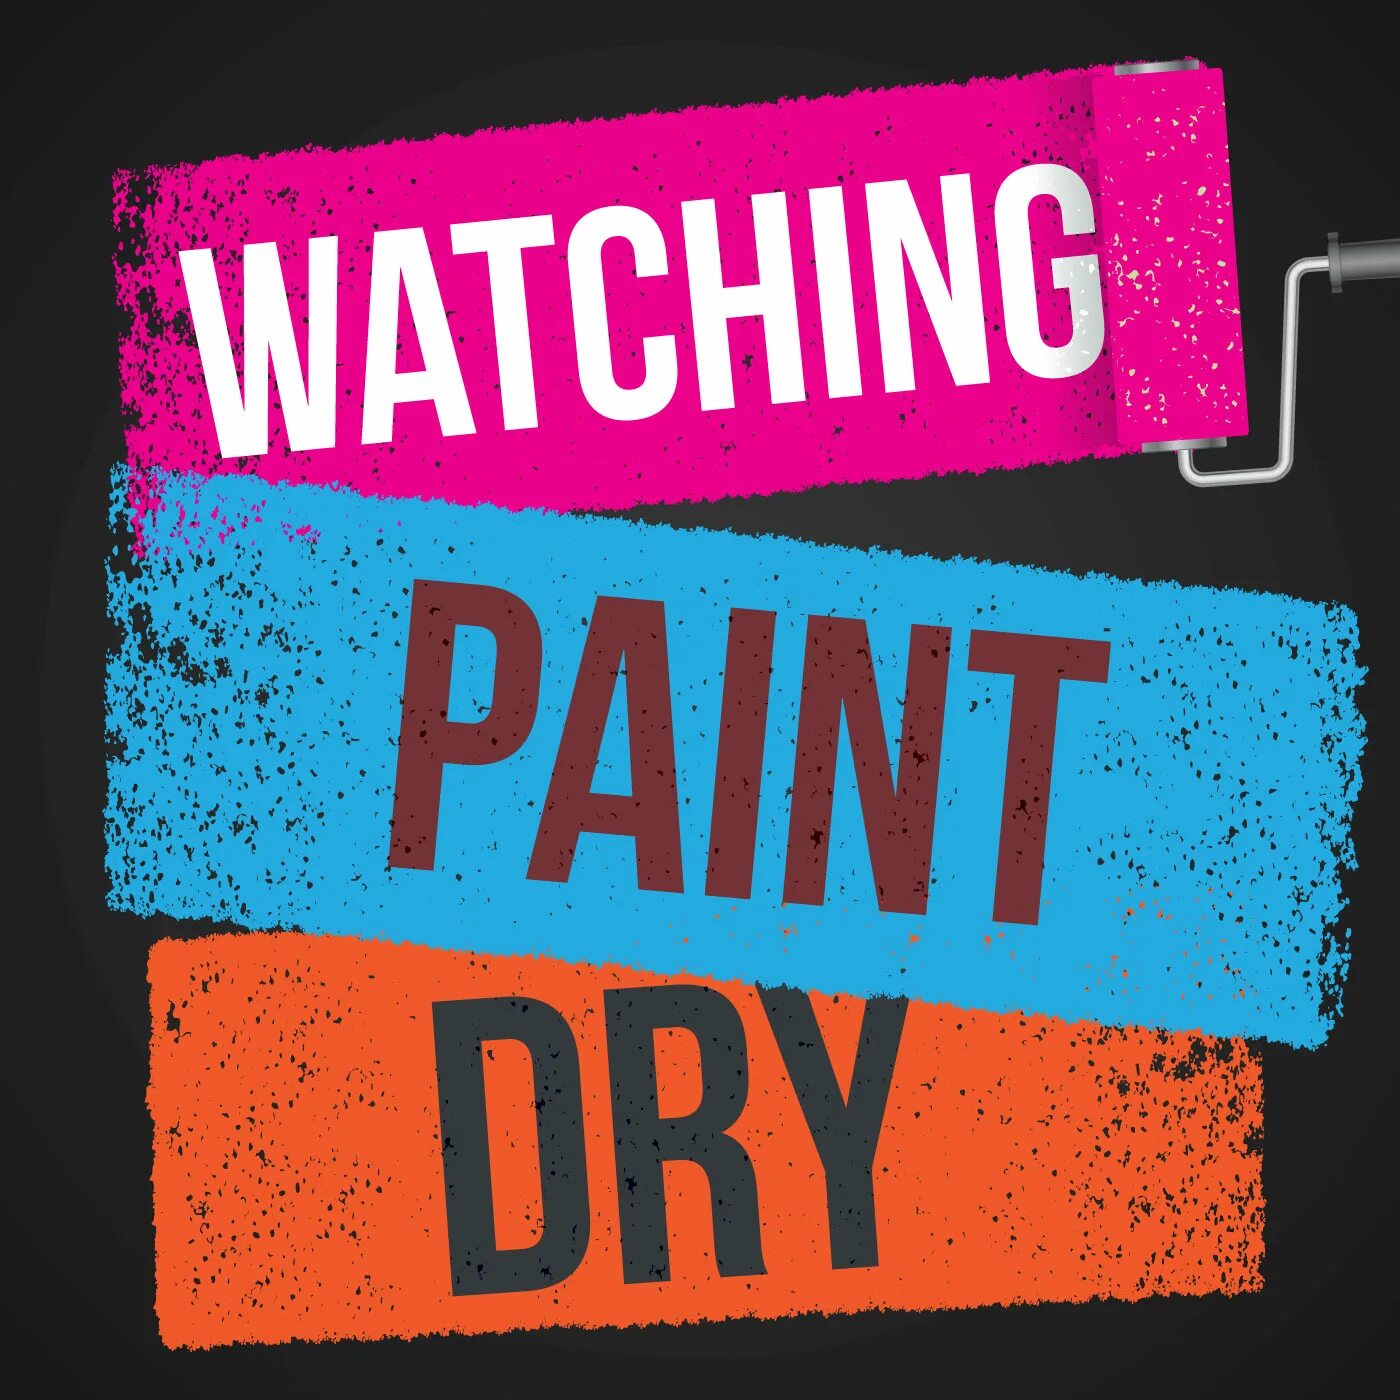 Watching paint